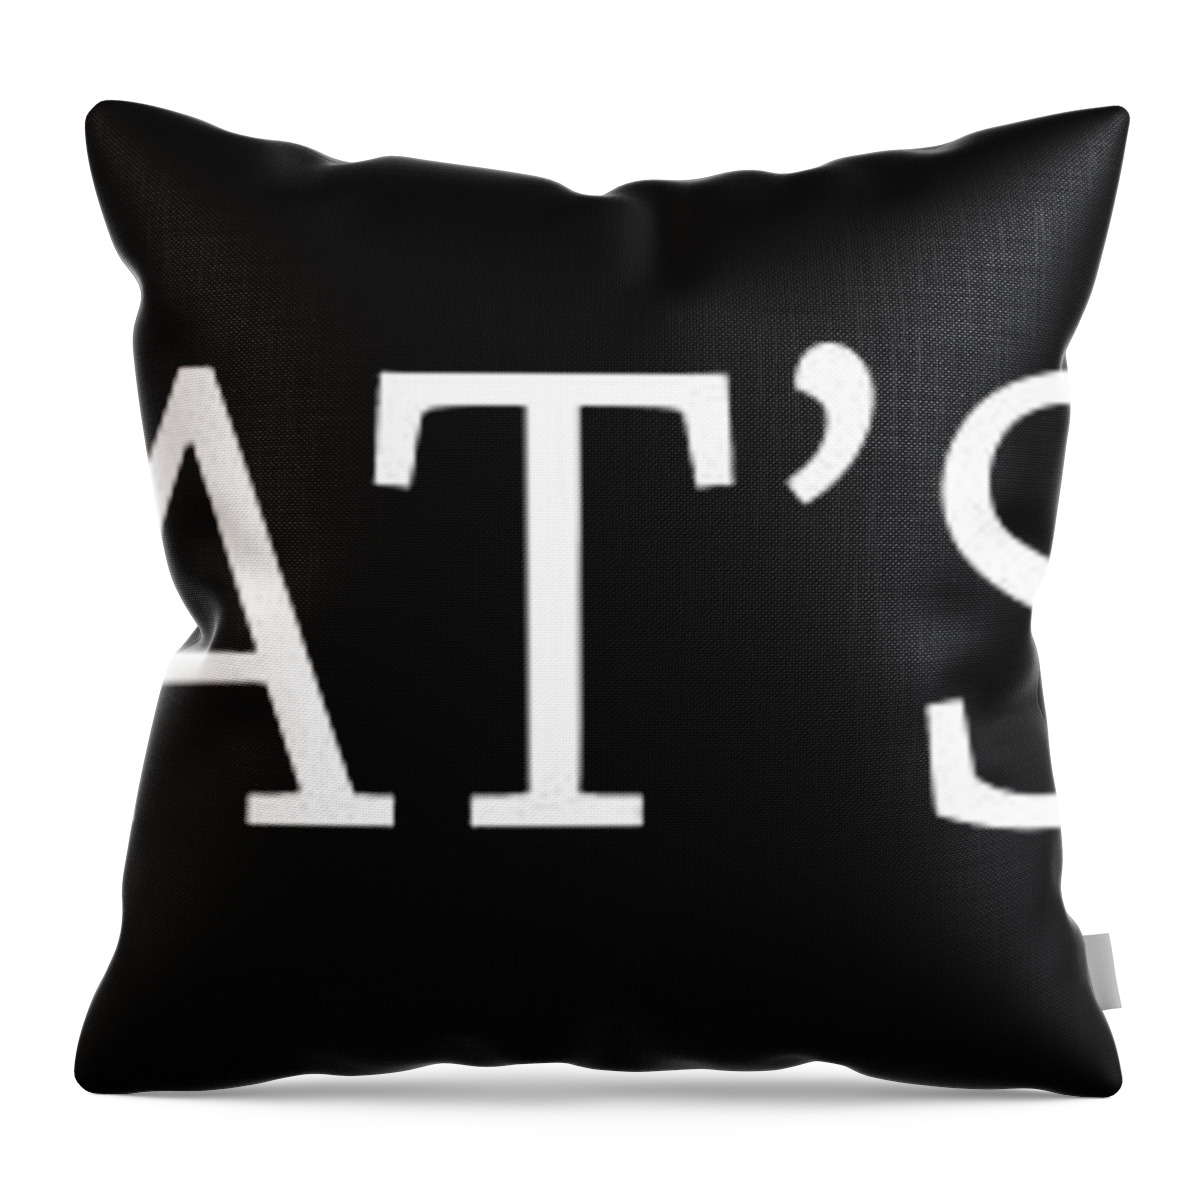 Safed Throw Pillow featuring the digital art Tzfats Up by Yom Tov Blumenthal